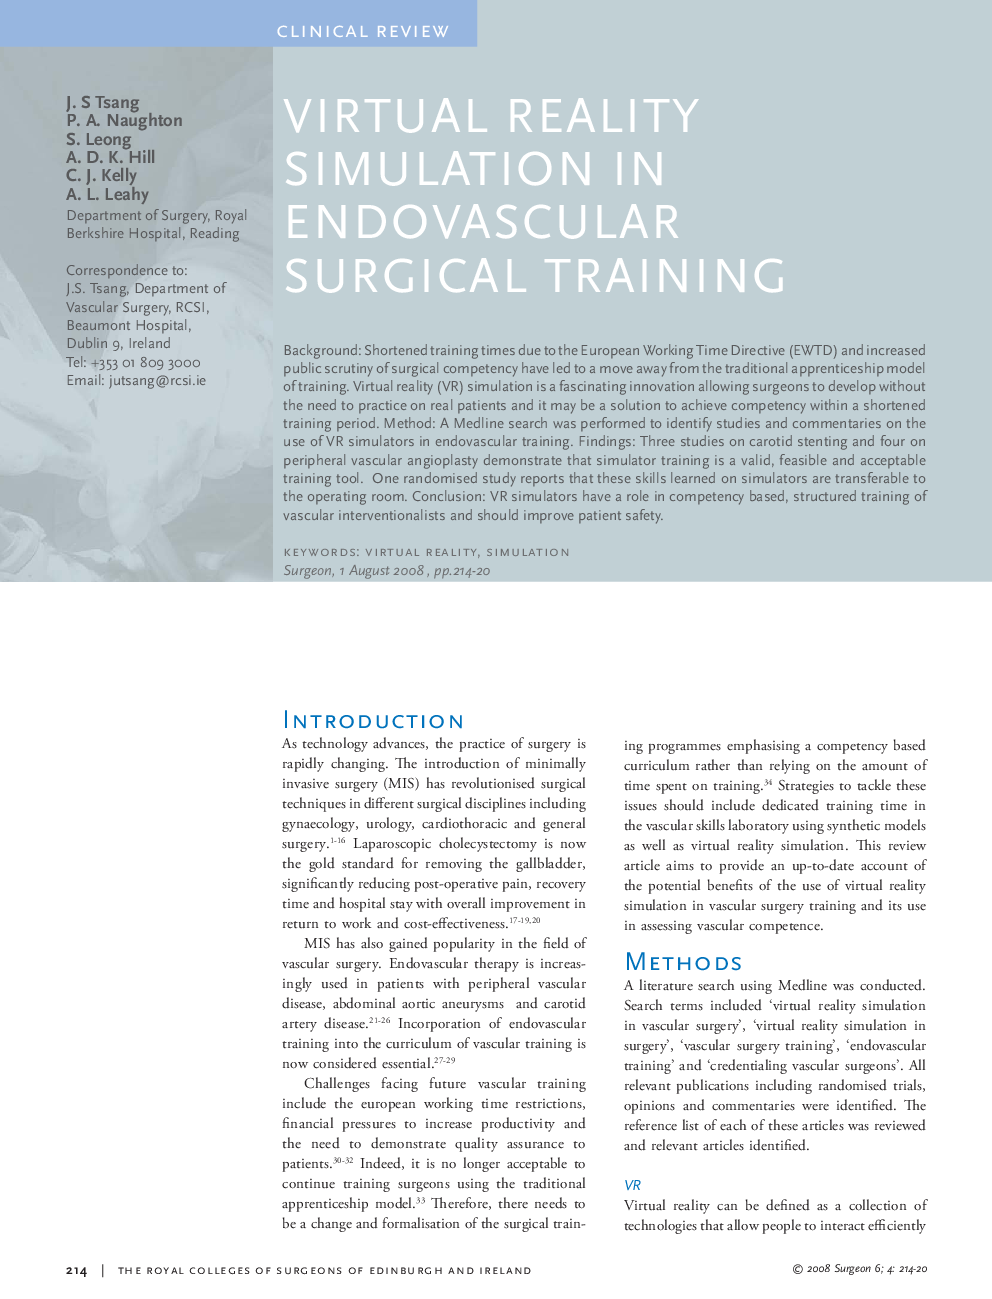 Virtual reality simulation in endovascular surgical training